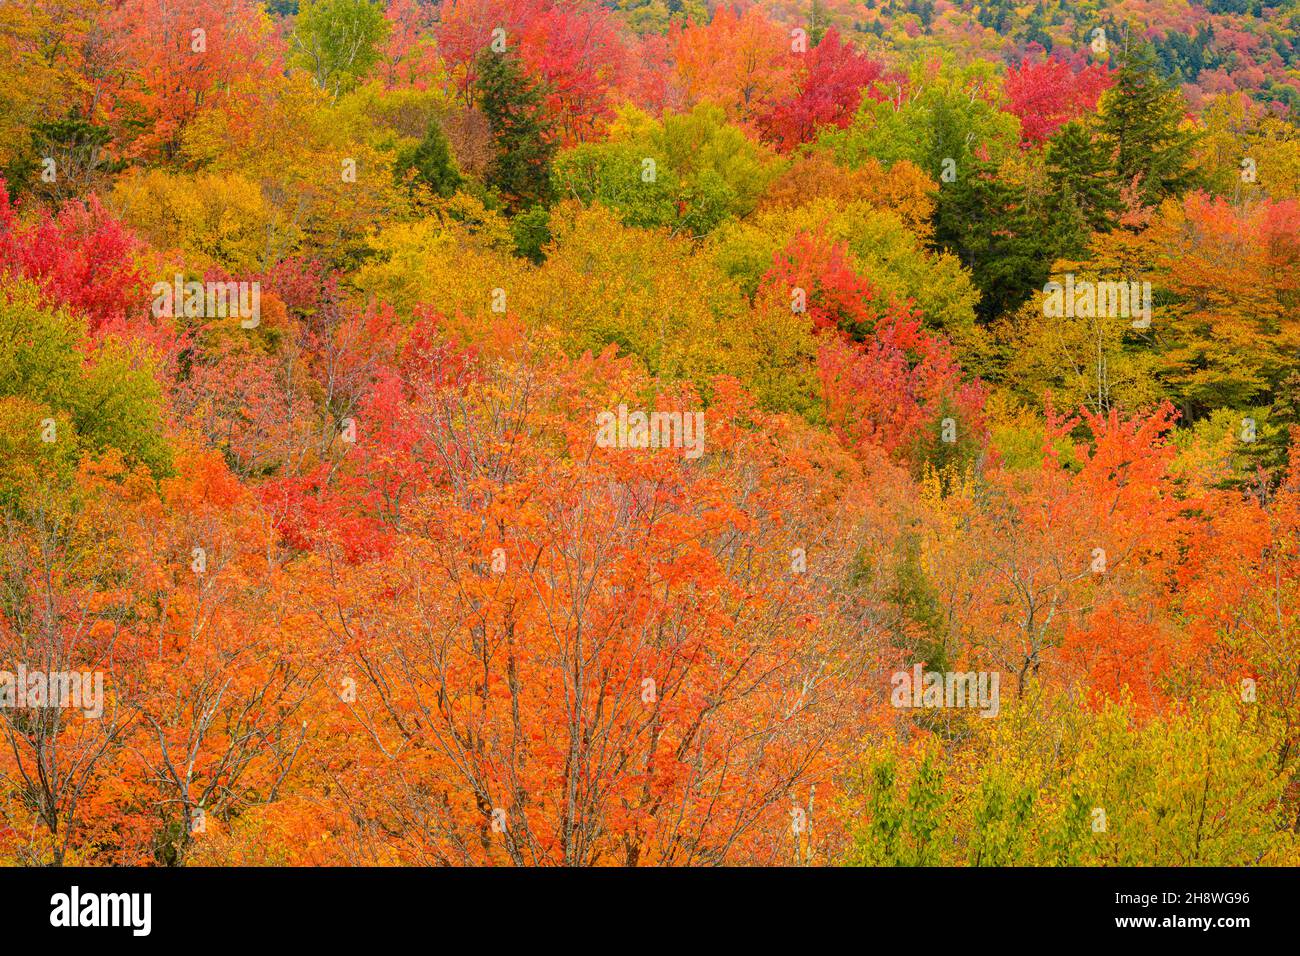 Autumn foliage in the deciduous forest on New England hillsides, Hwy 112, Kancamagus Highway, New Hampshire, USA Stock Photo